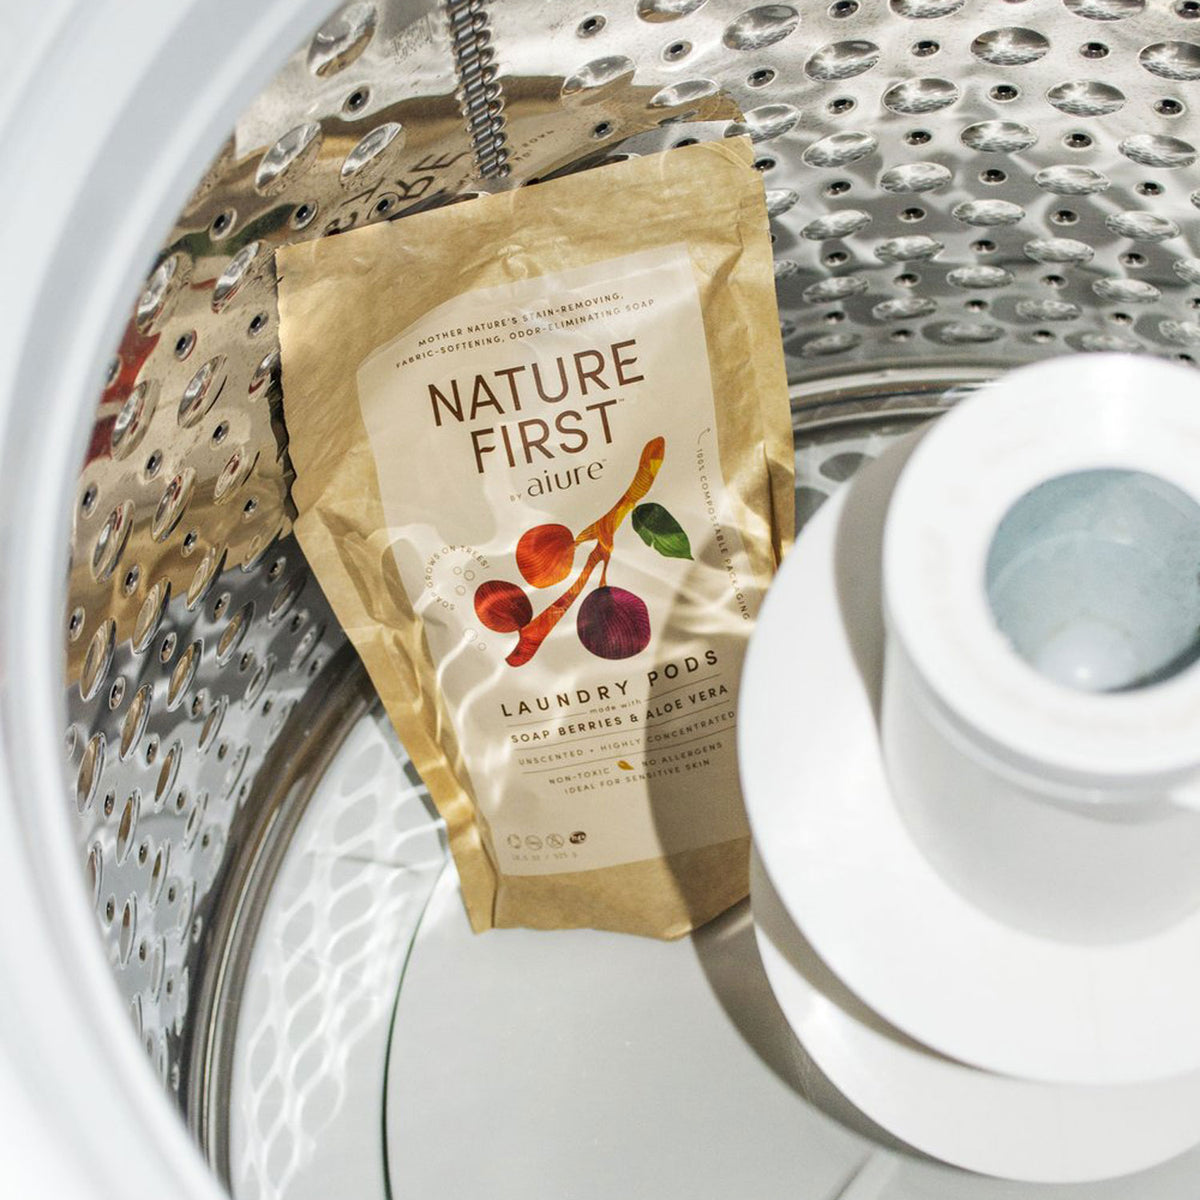 A bag of detergent pods sitting in an empty washing machine. Bag reads Nature First - aiure Laundry Pods